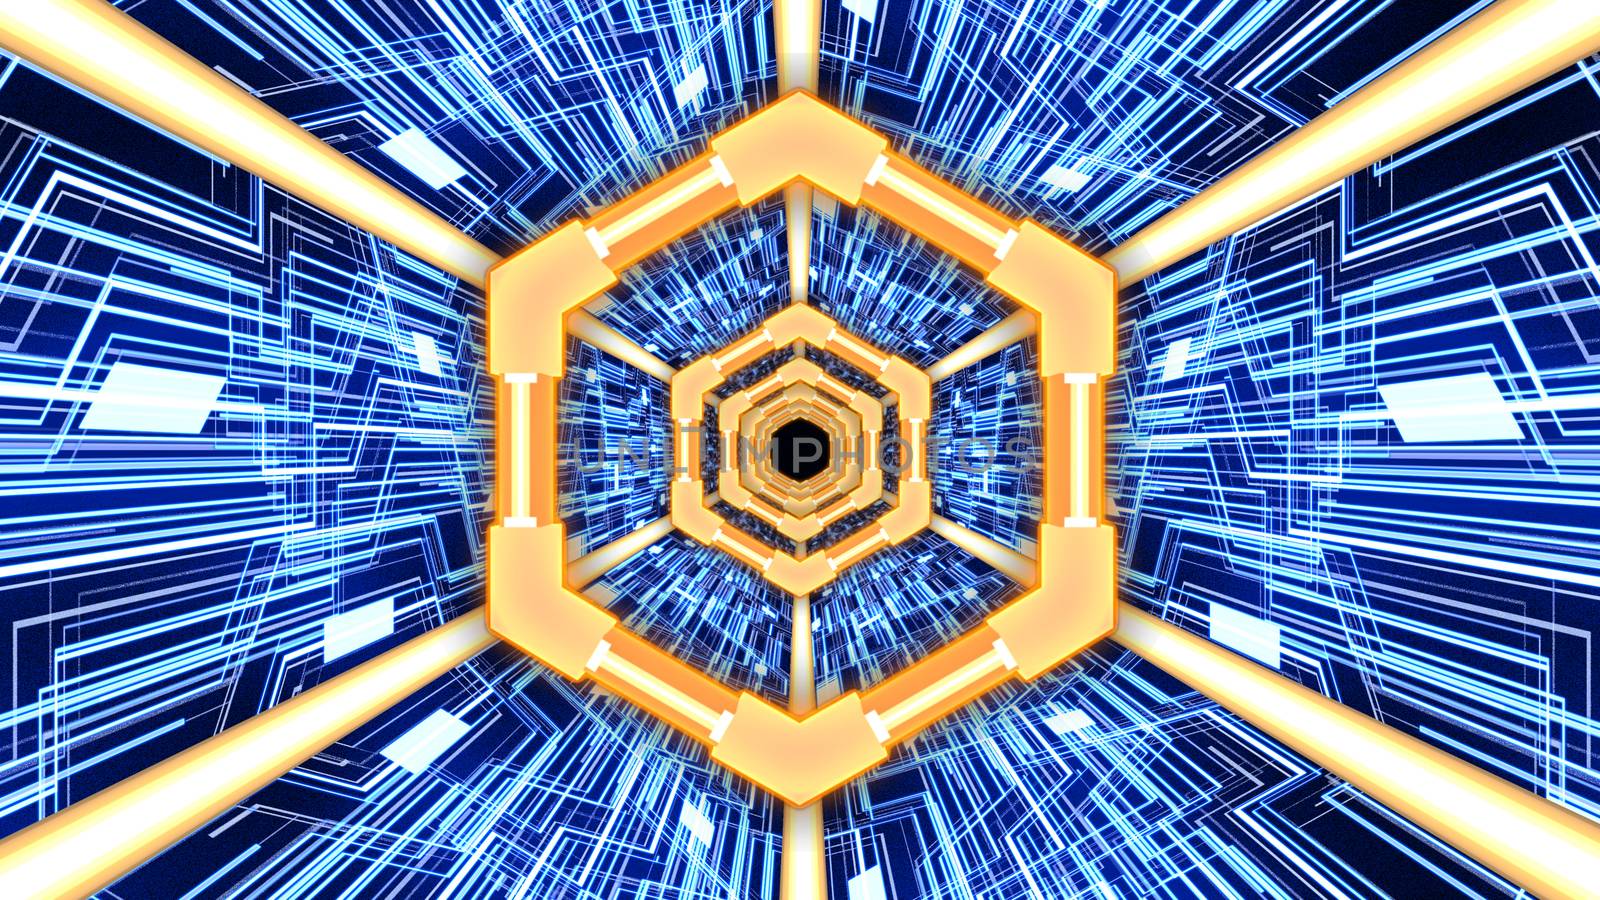 3D Abstract Digital Circuit System Tunnel with Hexagon Rings Borders in Orange-Blue Color Theme Background by ariya23156